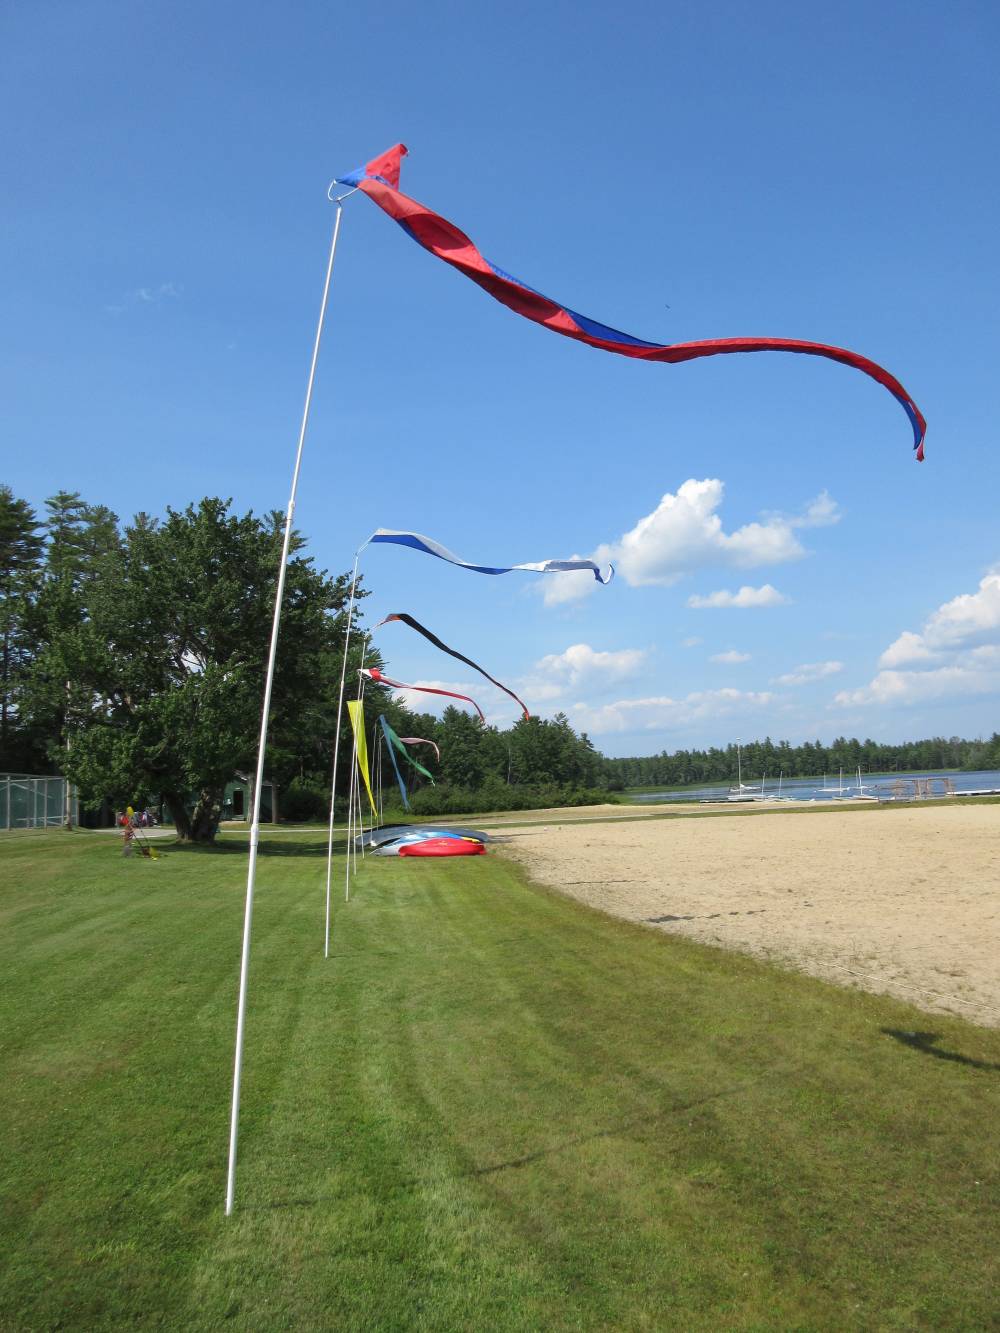 TOP MAINE THEATER CAMP: Tripp Lake Camp is a Top Theater Summer Camp located in Poland Maine offering many fun and enriching Theater and other camp programs. 